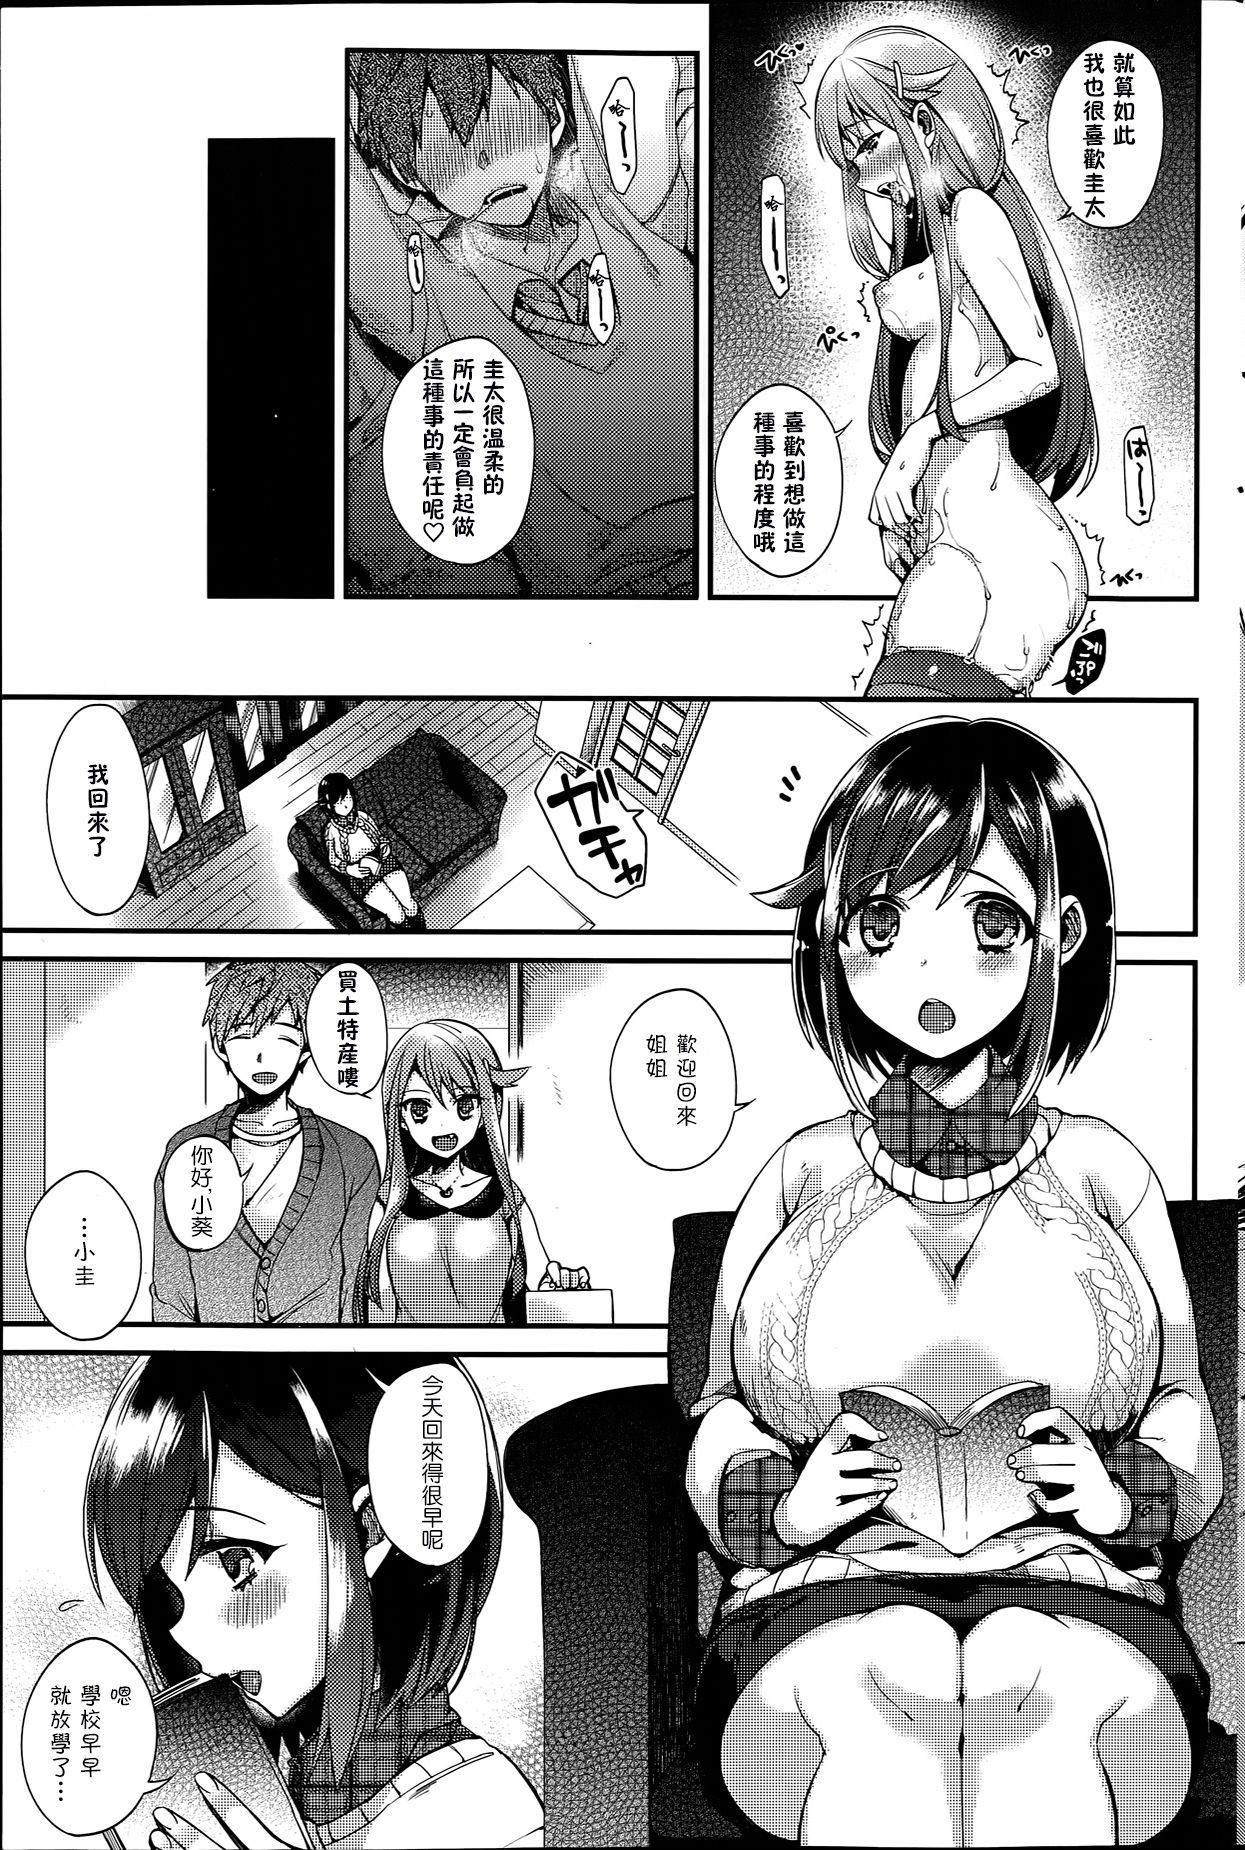 [Shindou] Sisters Conflict (Comic Hotmilk 2014-06) [Chinese] [无毒汉化组] [しんどう] Sisters Conflict (コミックホットミルク 2014年6月号) [中国翻訳]